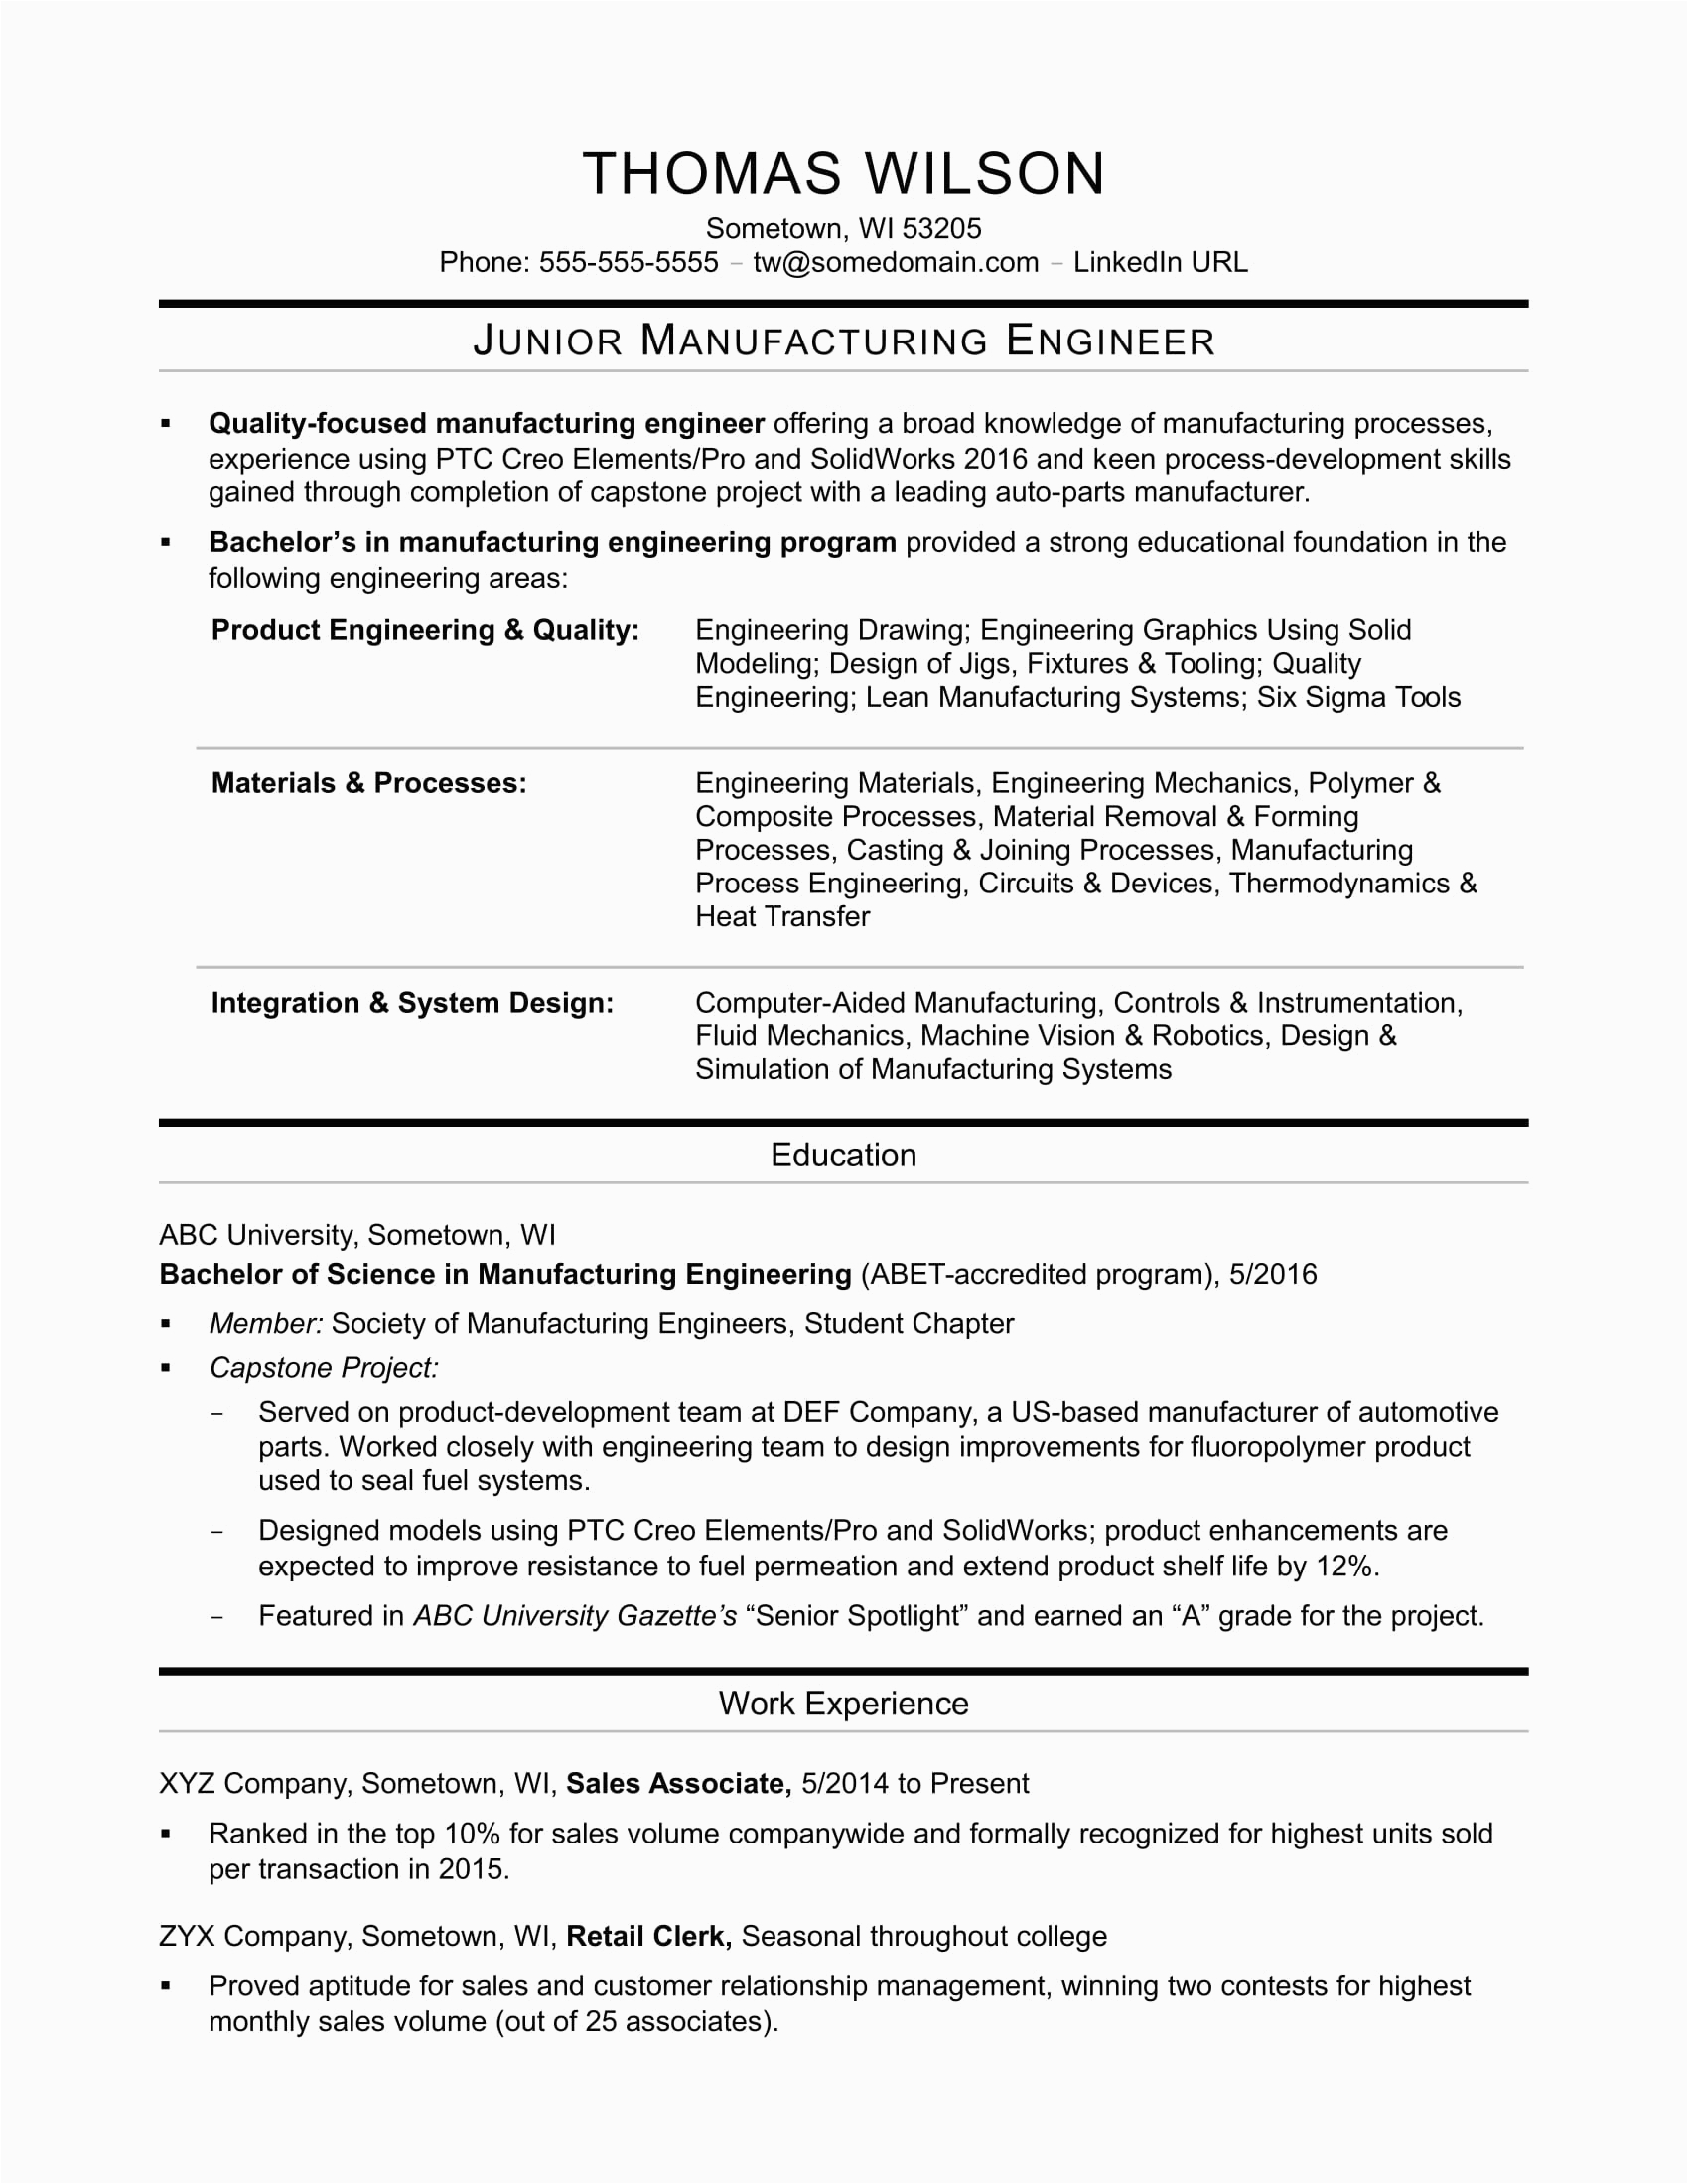 Manufacturing and Production Engineer Resume Samples Sample Resume for An Entry Level Manufacturing Engineer